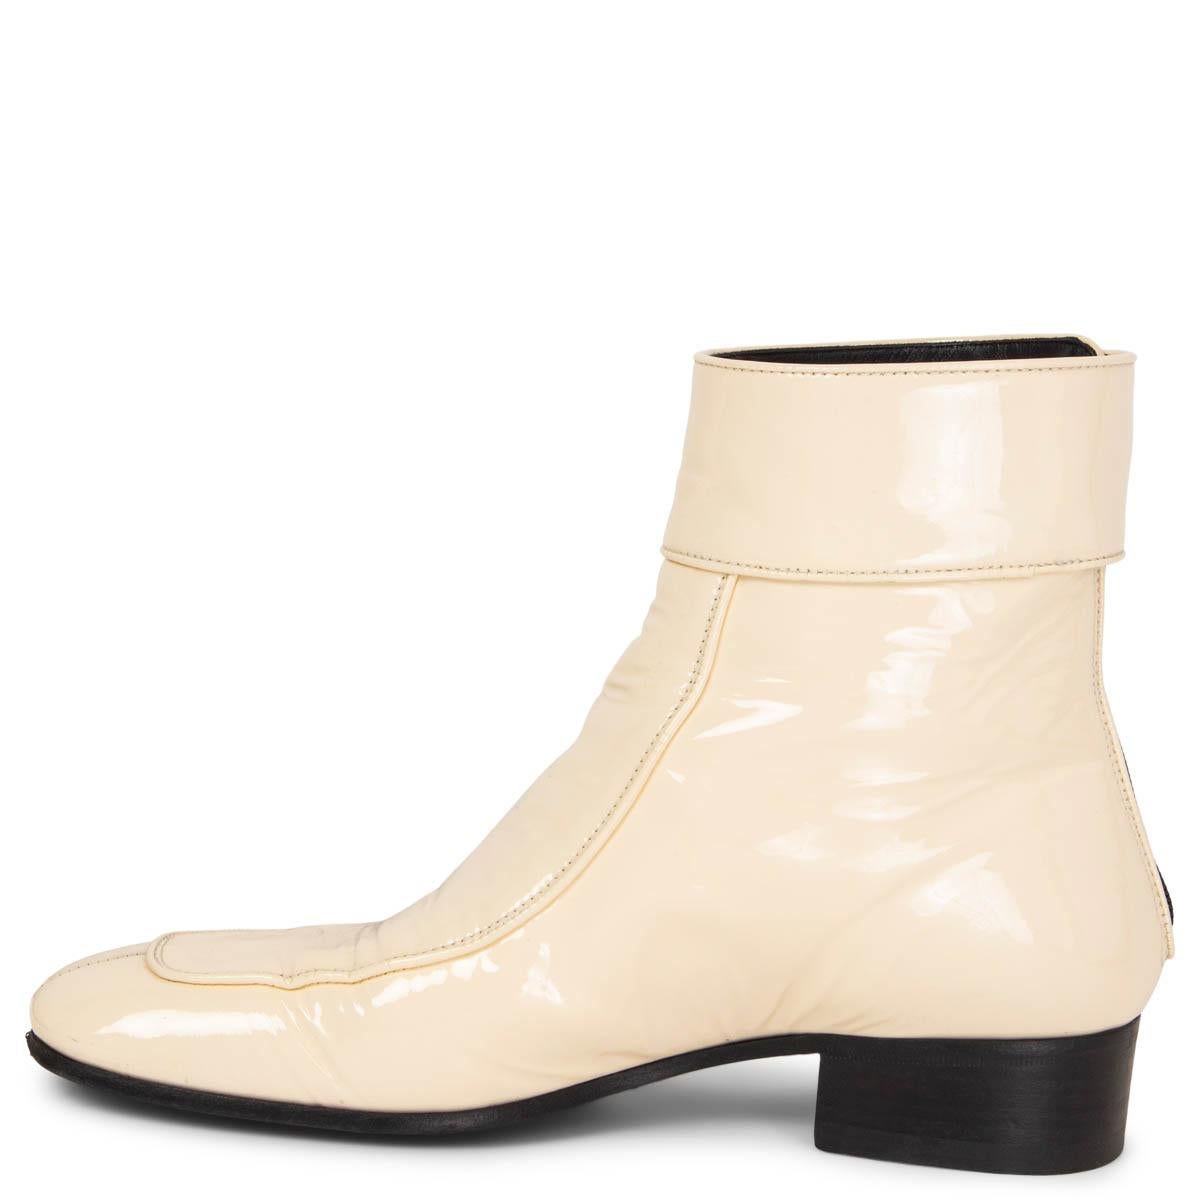 off white patent leather boots